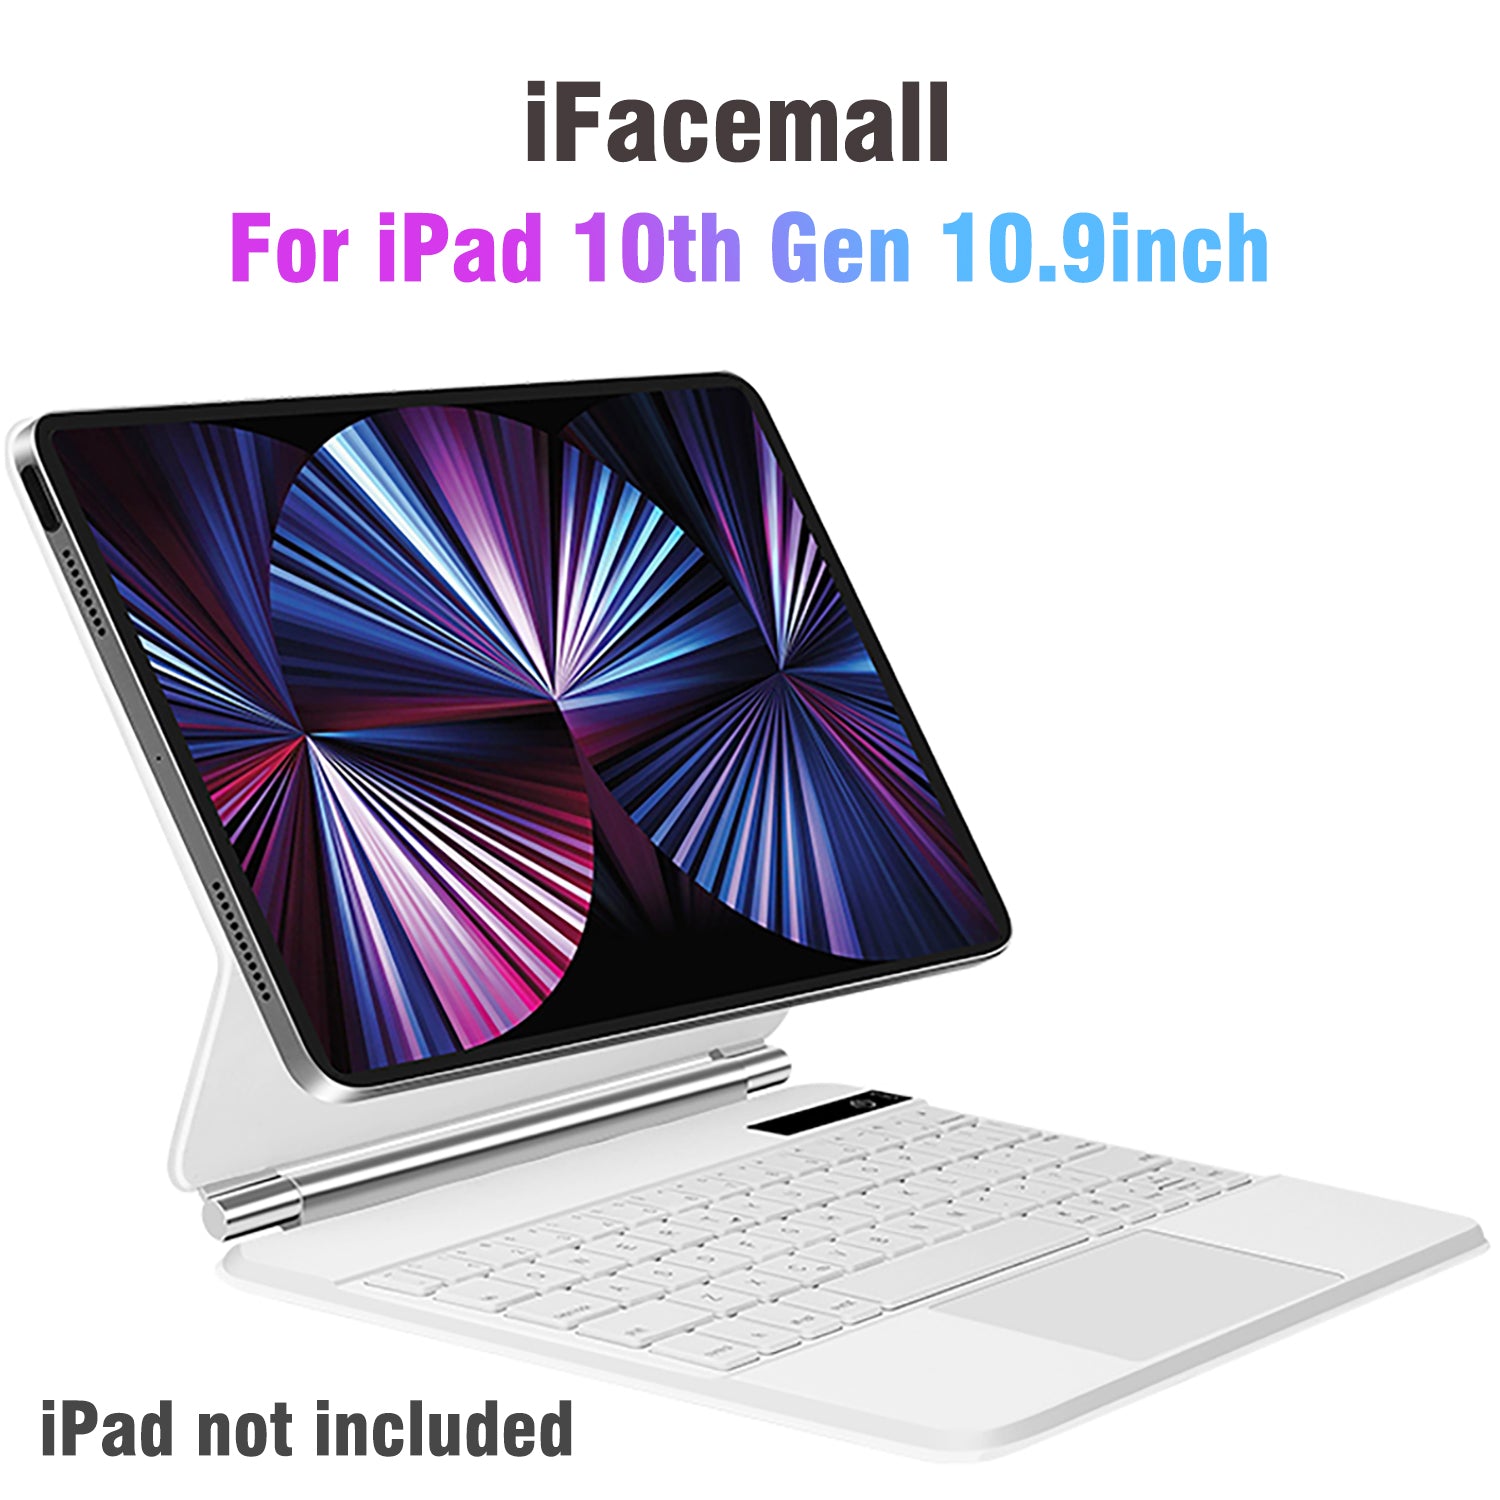 iFacemall Stylish Magic Keyboard Case for iPad 10th Generation 10.9inch (2022)